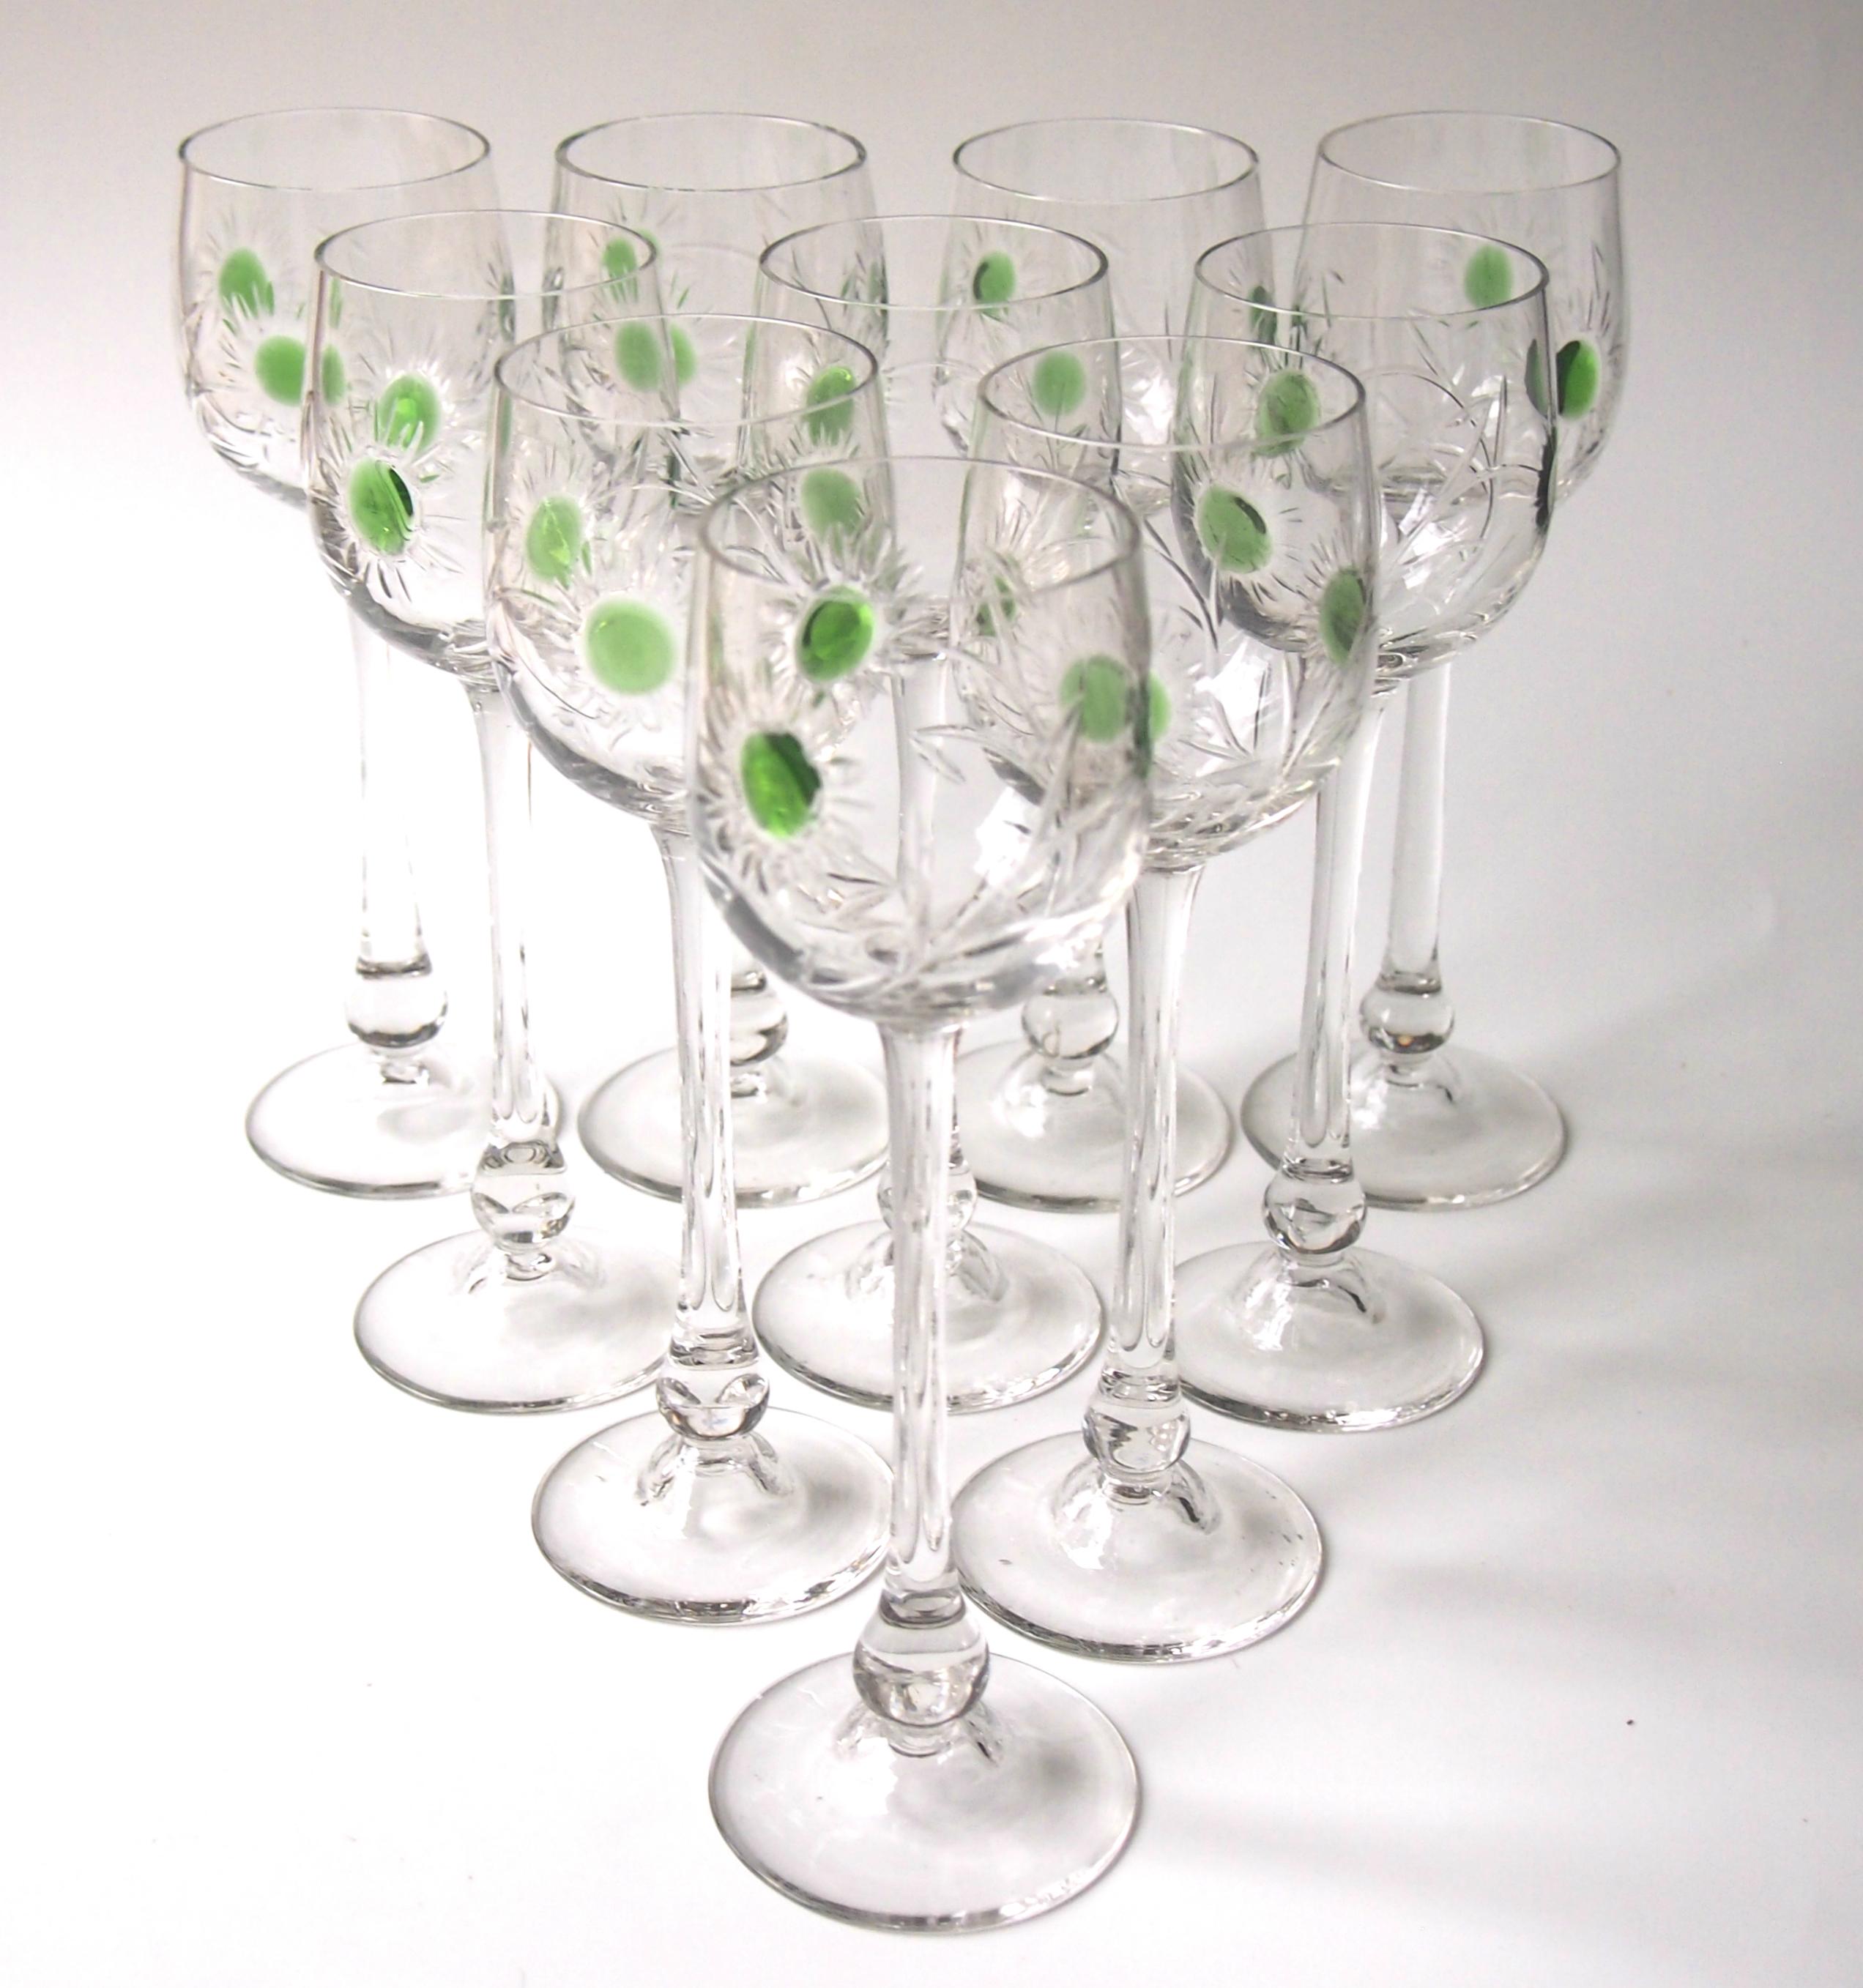 Stunning set of ten Art Nouveau hot applied hand cut crystal hock glasses by the important German maker Jean Beck. Each elegant glass has three hot applied green spots and was then hand cut in a stylised Art Nouveau pattern. One of the most